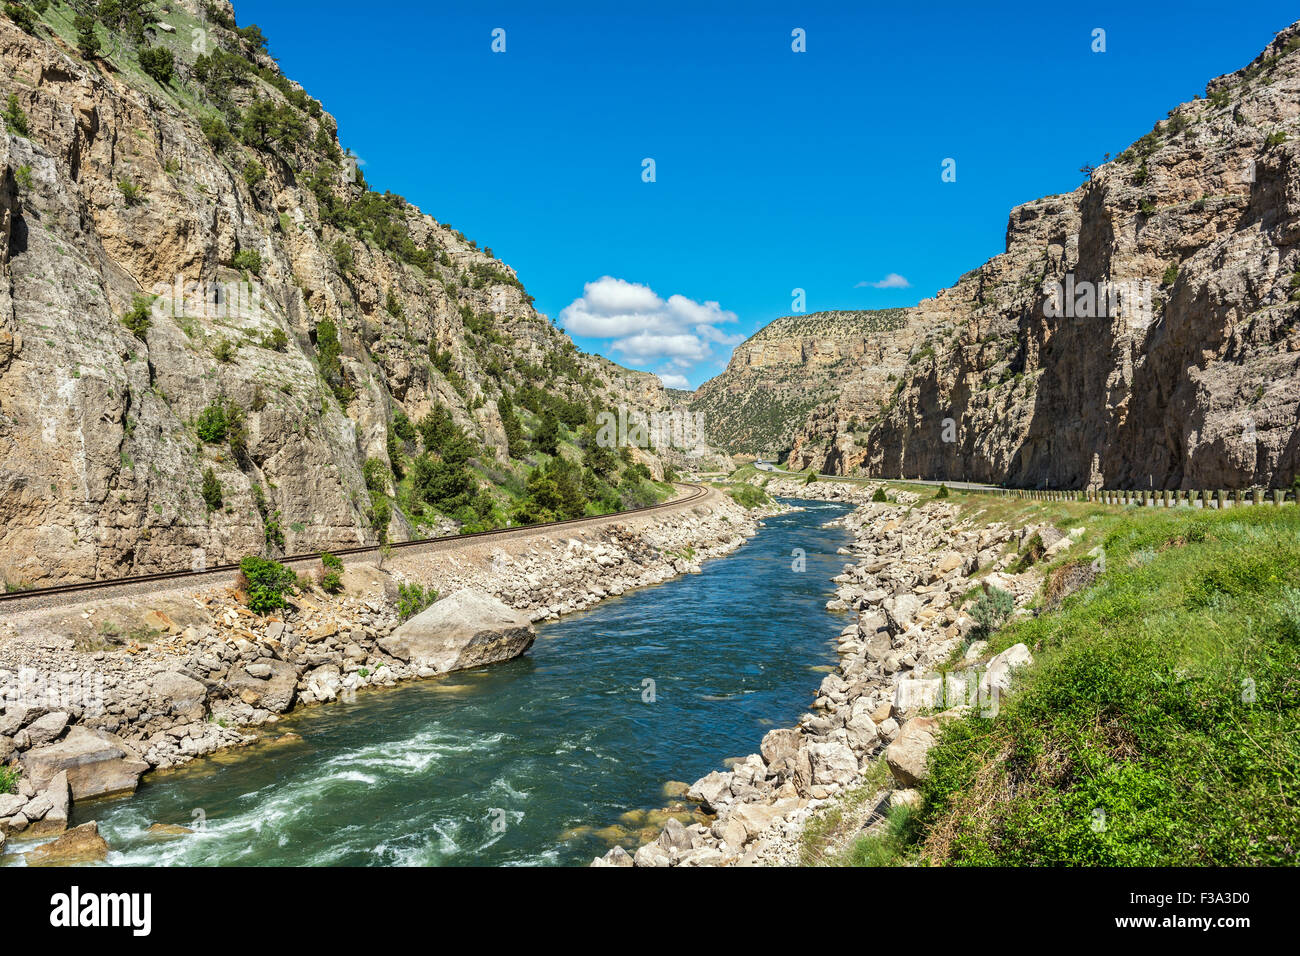 Le Wyoming, Wind River Canyon, U.S. Hwy 20 Banque D'Images